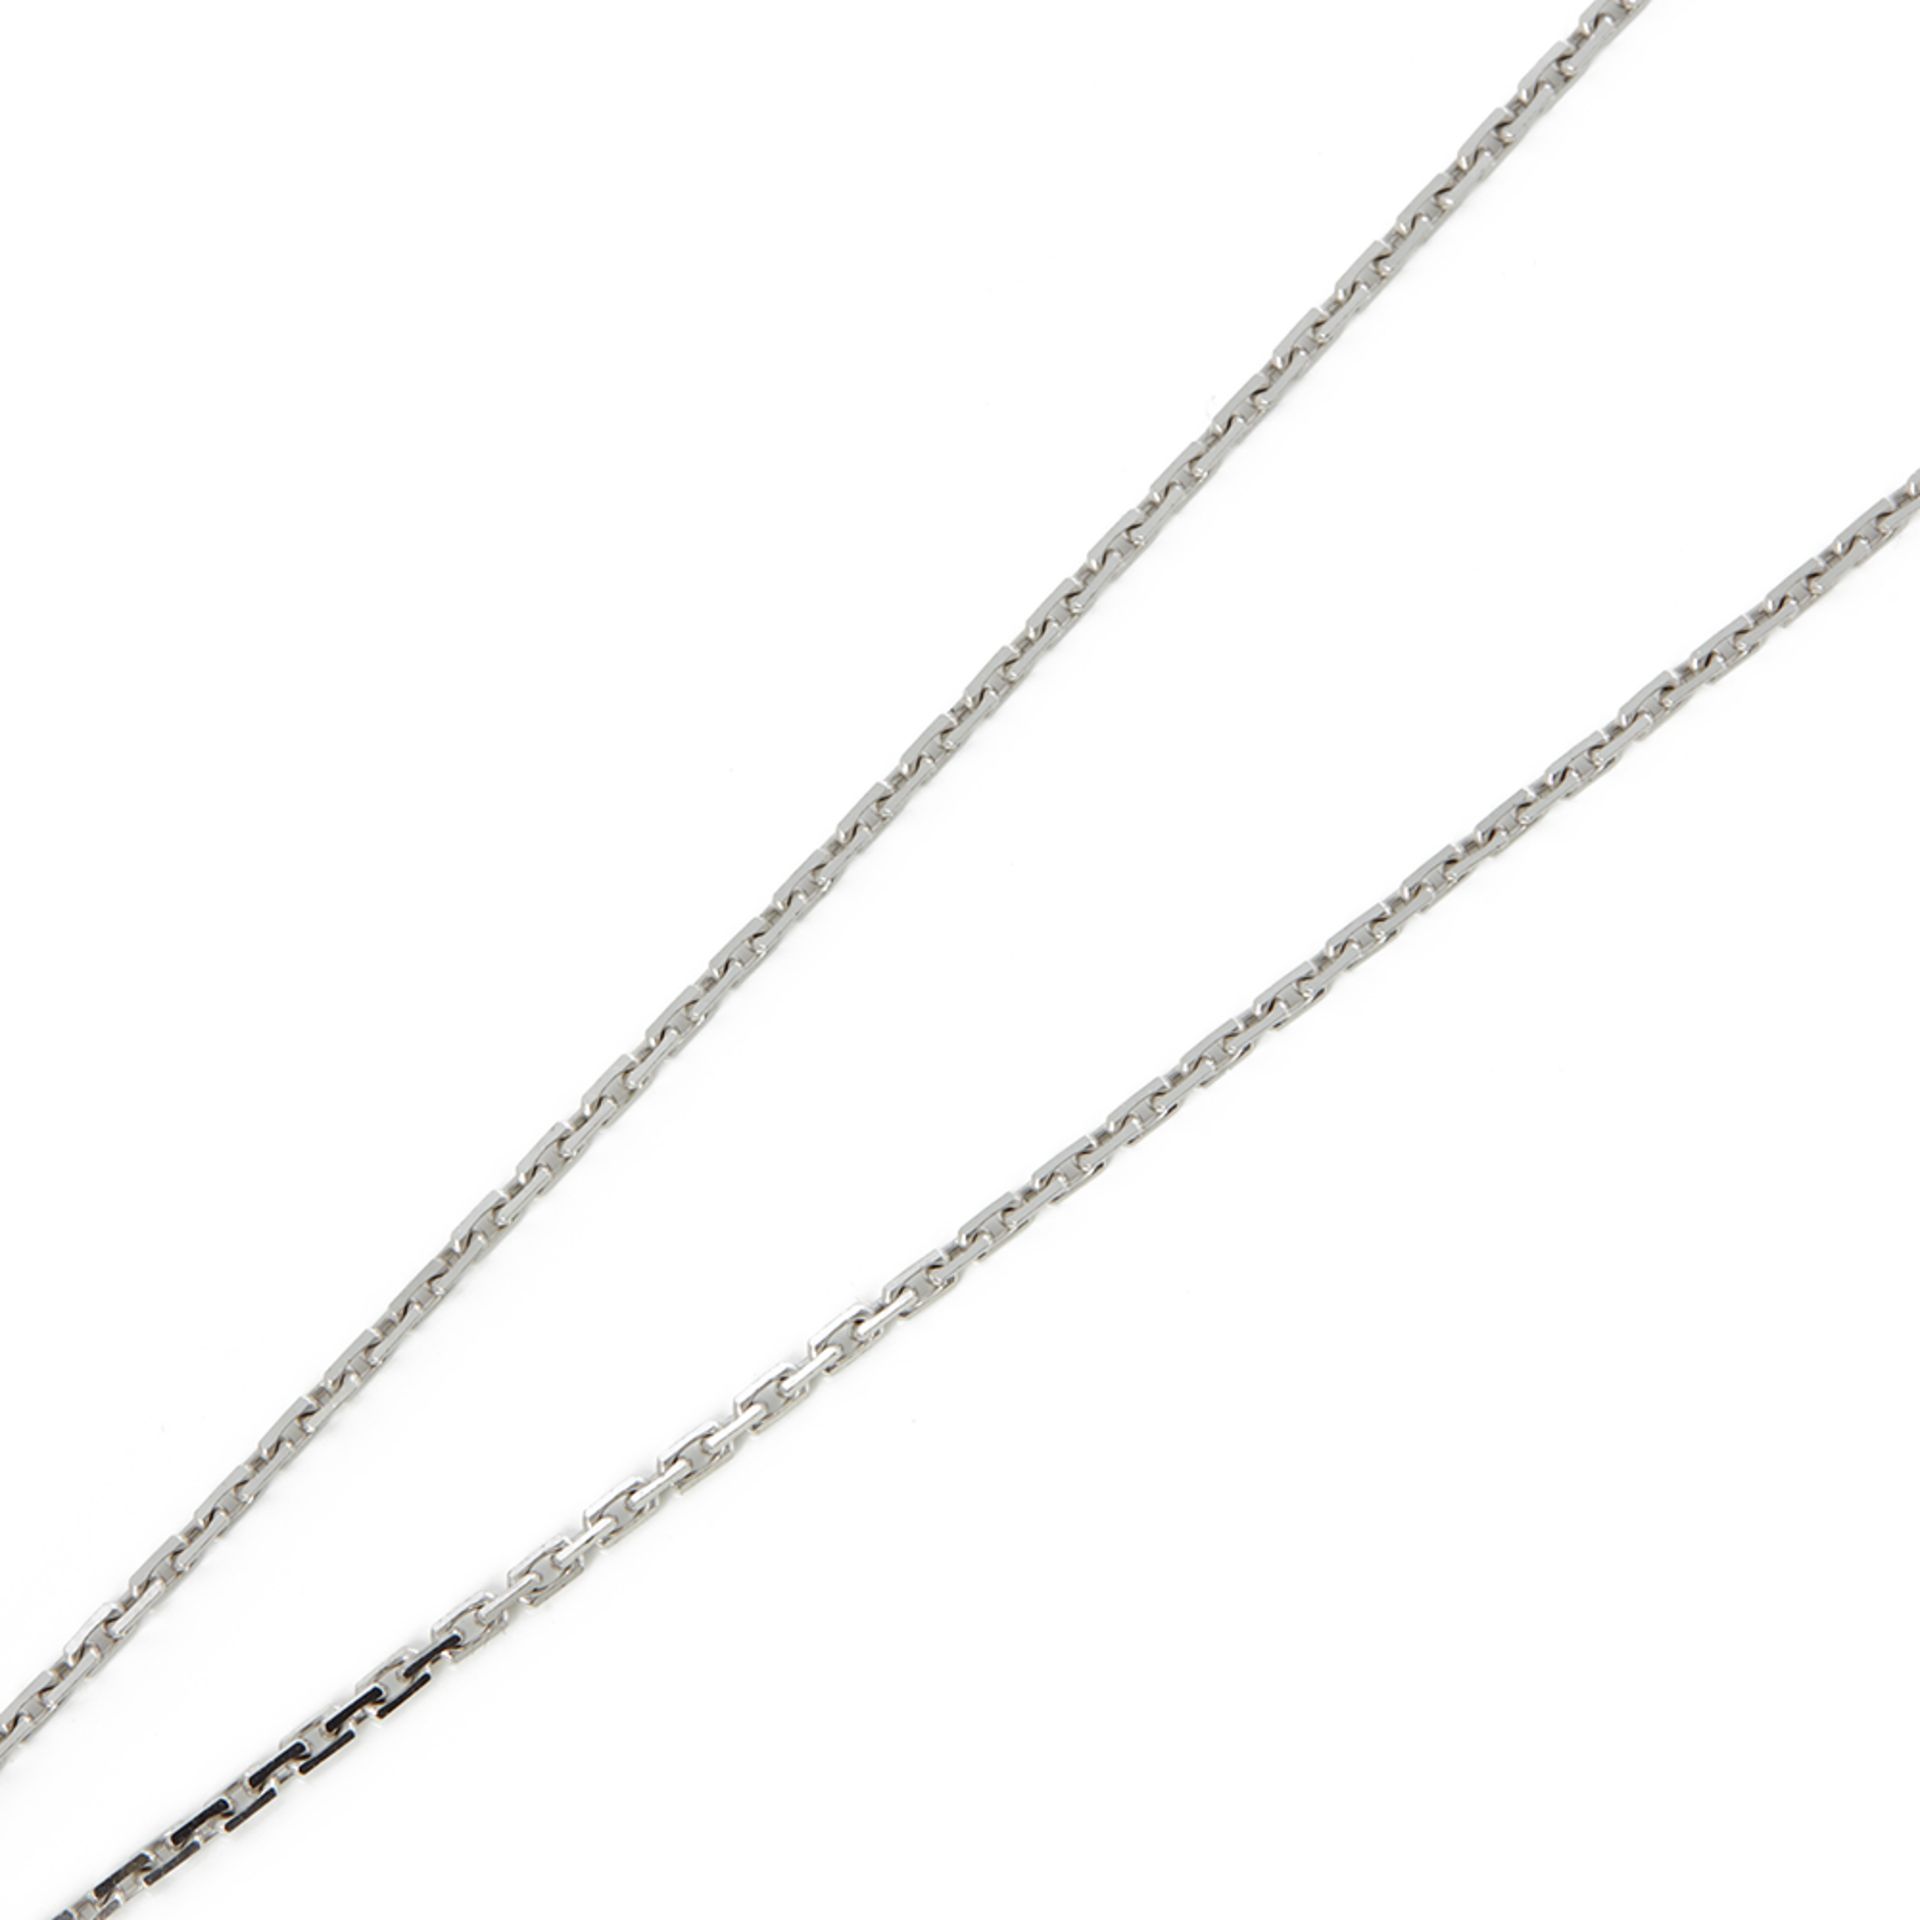 Cartier 18k White Gold Diamond Love Necklace - Image 2 of 6